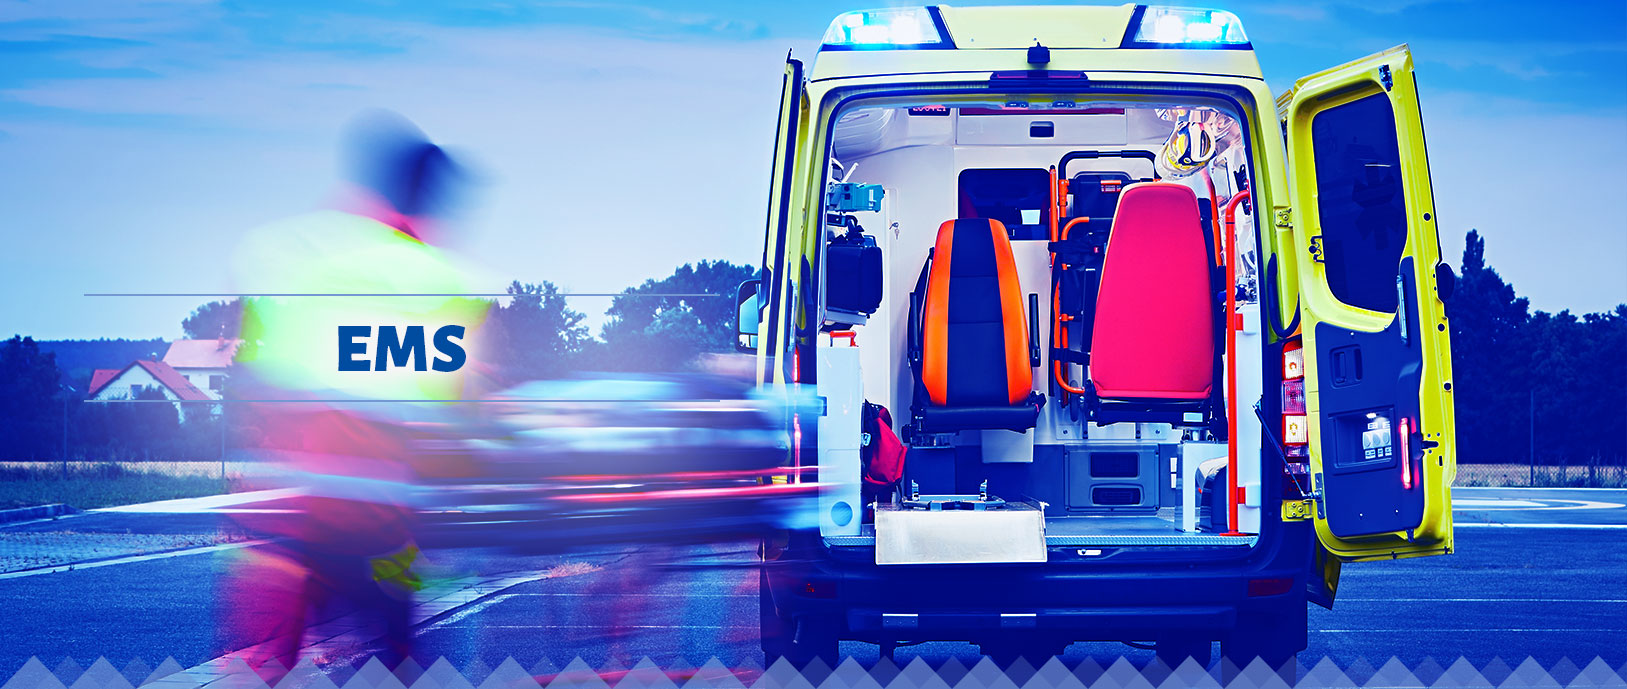 Emergency Medical Services (EMS): the back view of an emergency van with its back doors open. The van is fully geared with equipment and a bed. There is a blurred image of an emergency medical technician heading toward the van and indicating immediate response.